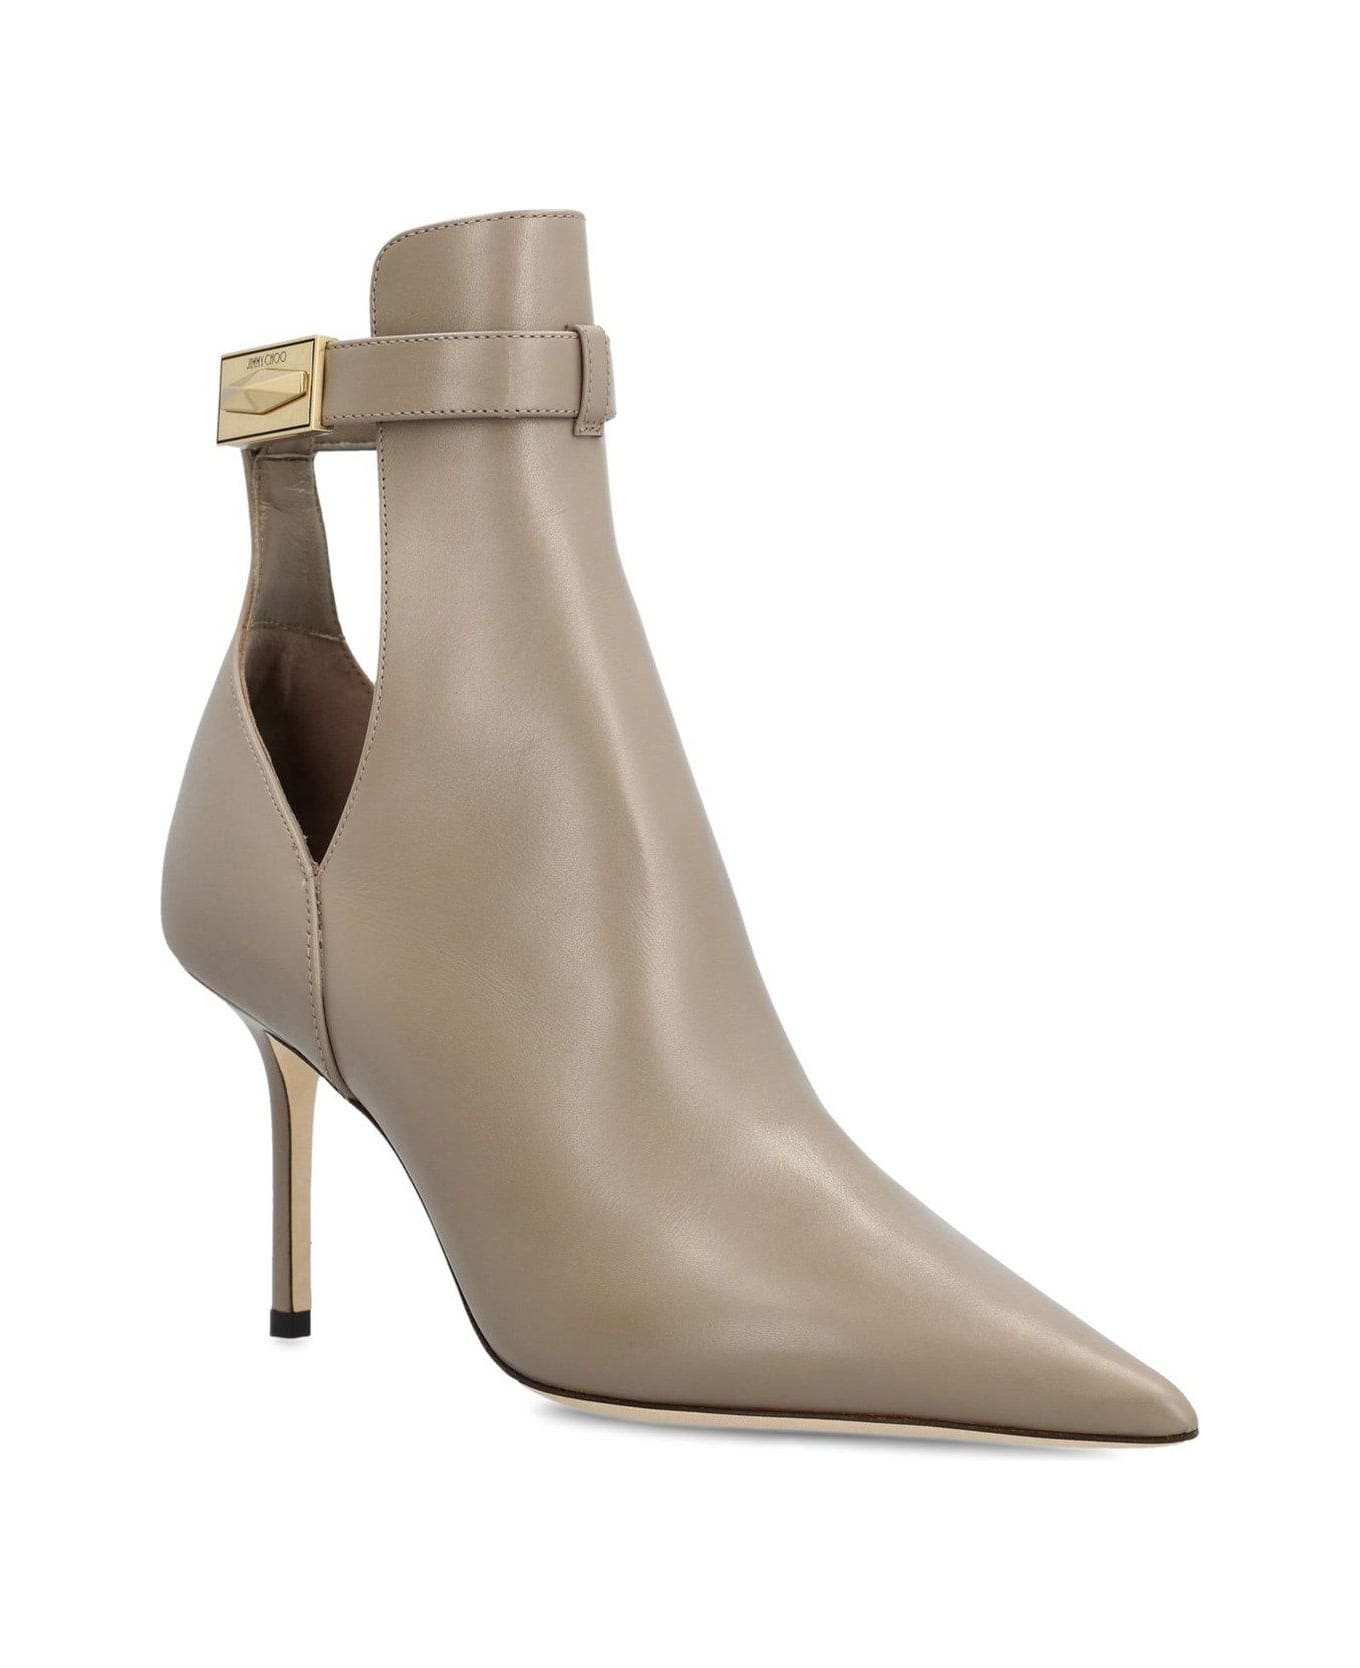 Jimmy Choo Nell 85 Cut-out Pointed-toe Ankle Boots - Dove Grey ブーツ